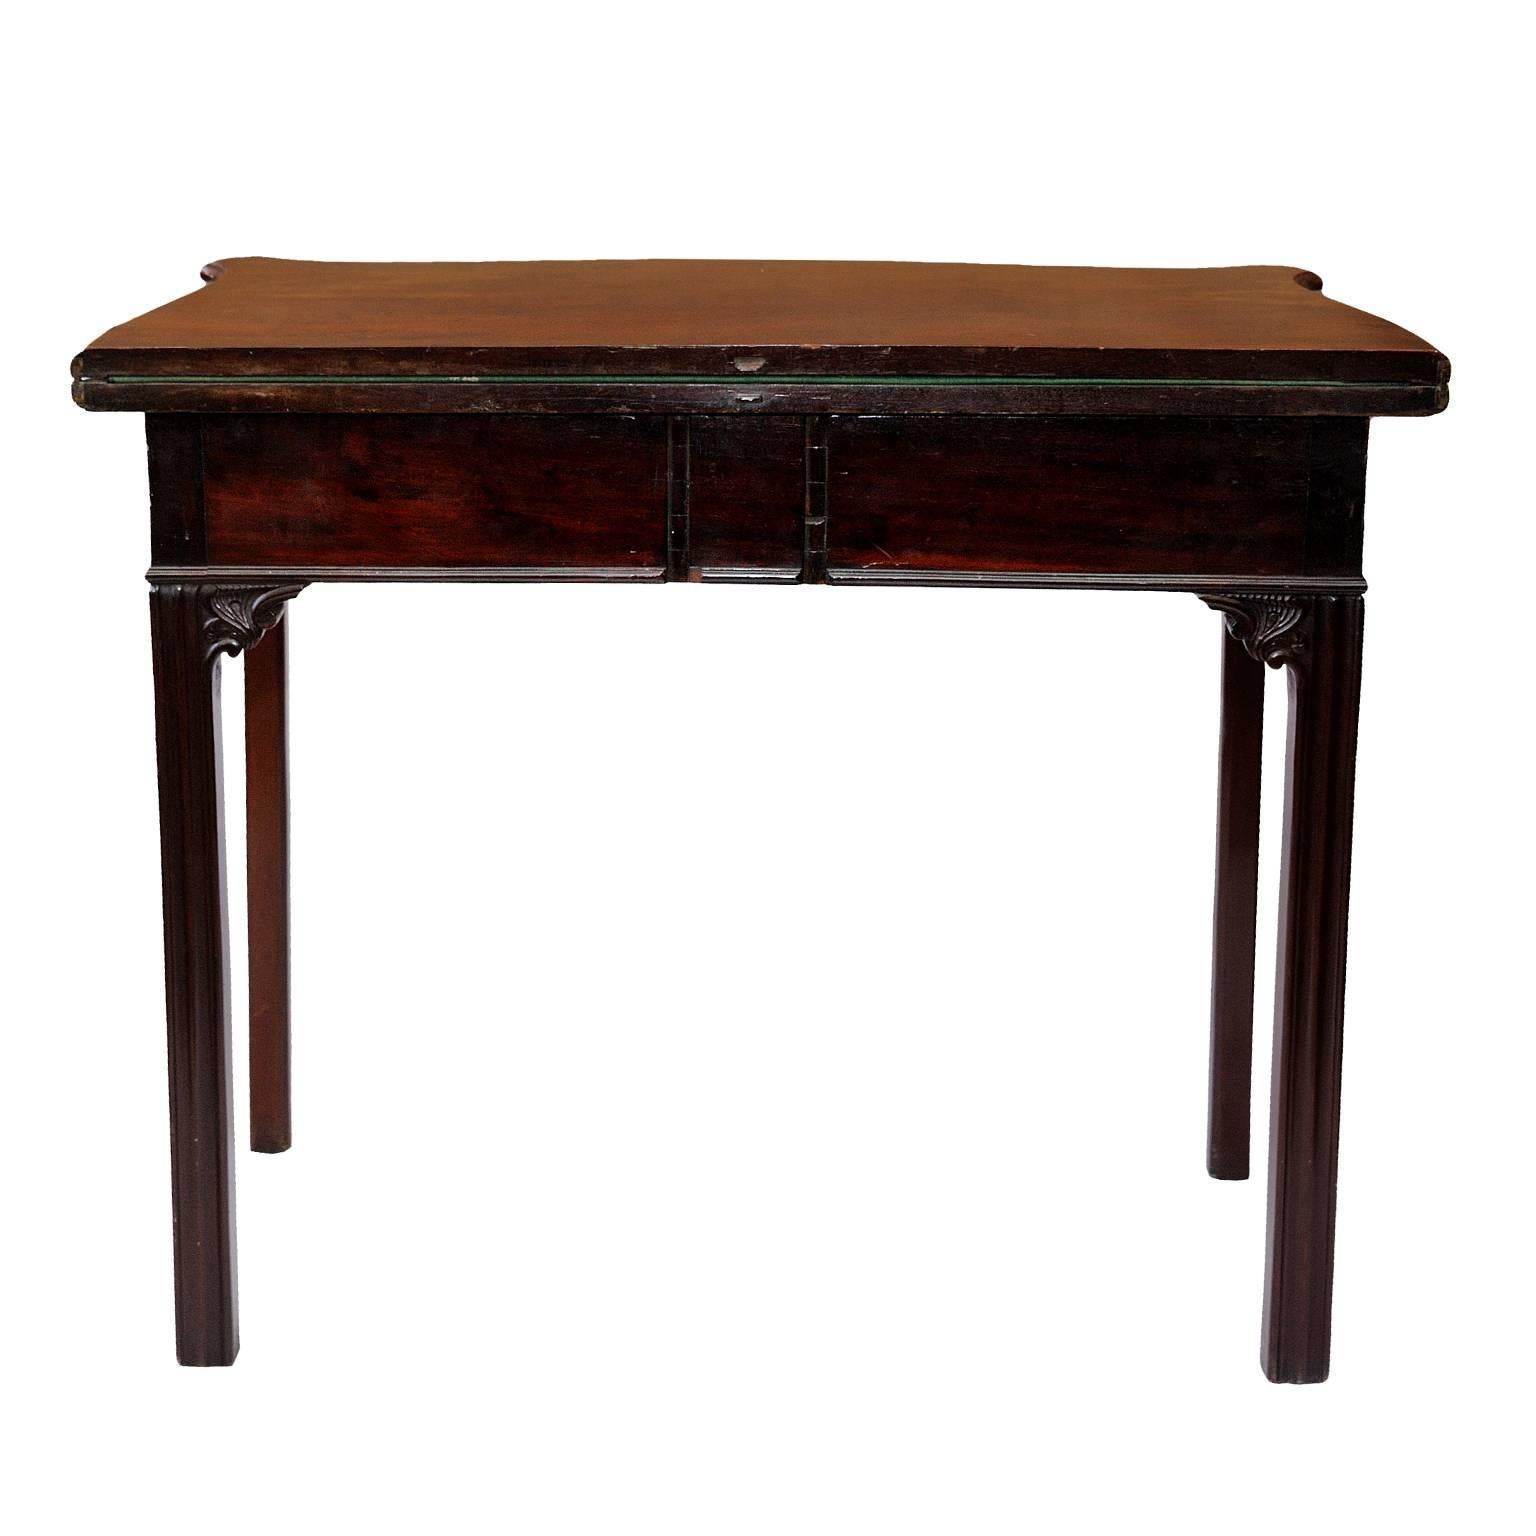 Polished George III Mahogany Serpentine Fronted Card Table, circa 1780 For Sale